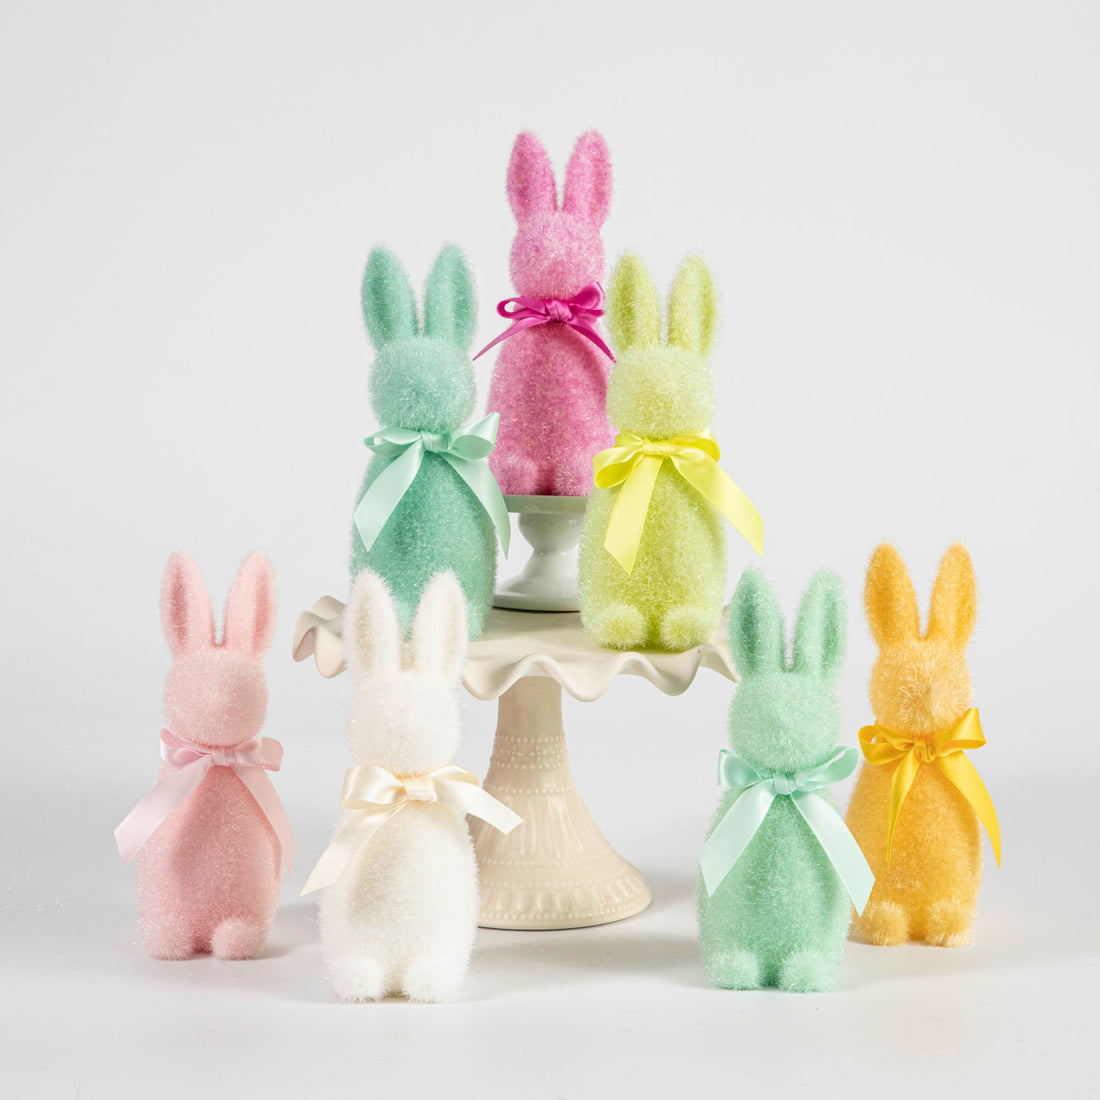 A group of Glitterville Small Flocked Pastel Button Nose Bunnies sitting on top of a cake stand.